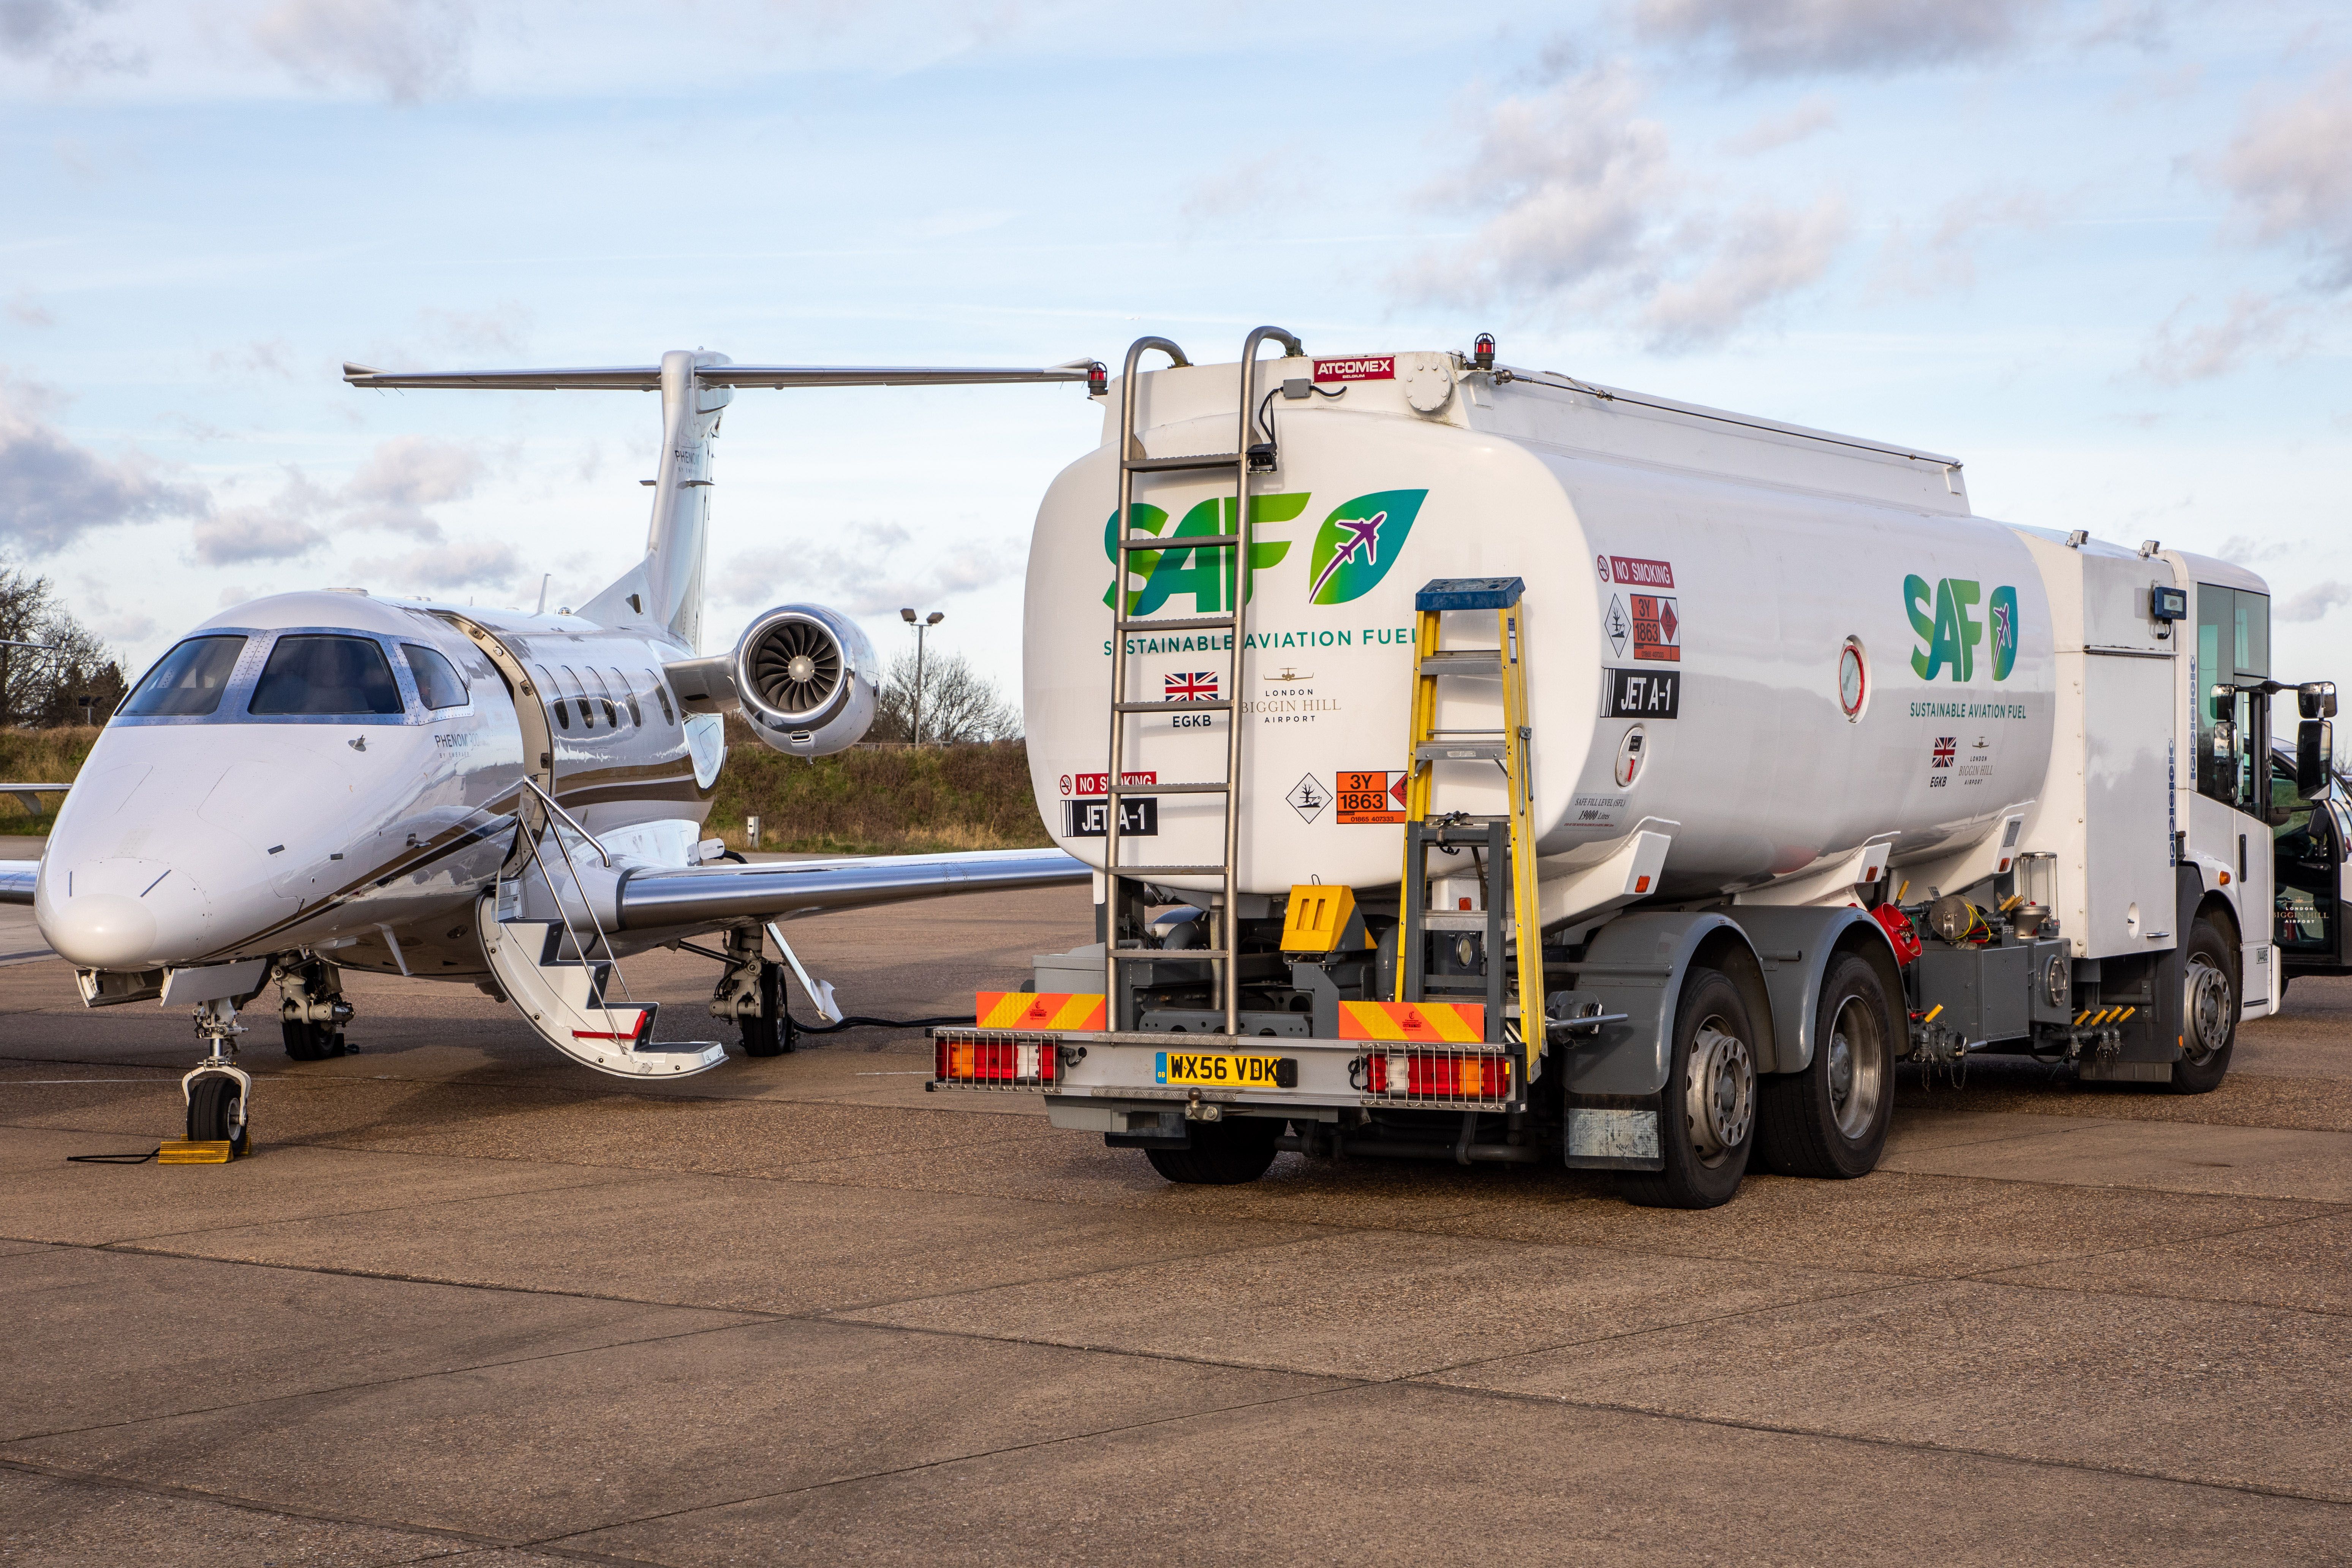 An Embraer Phenom aircraft next to a truck filled with SAF.